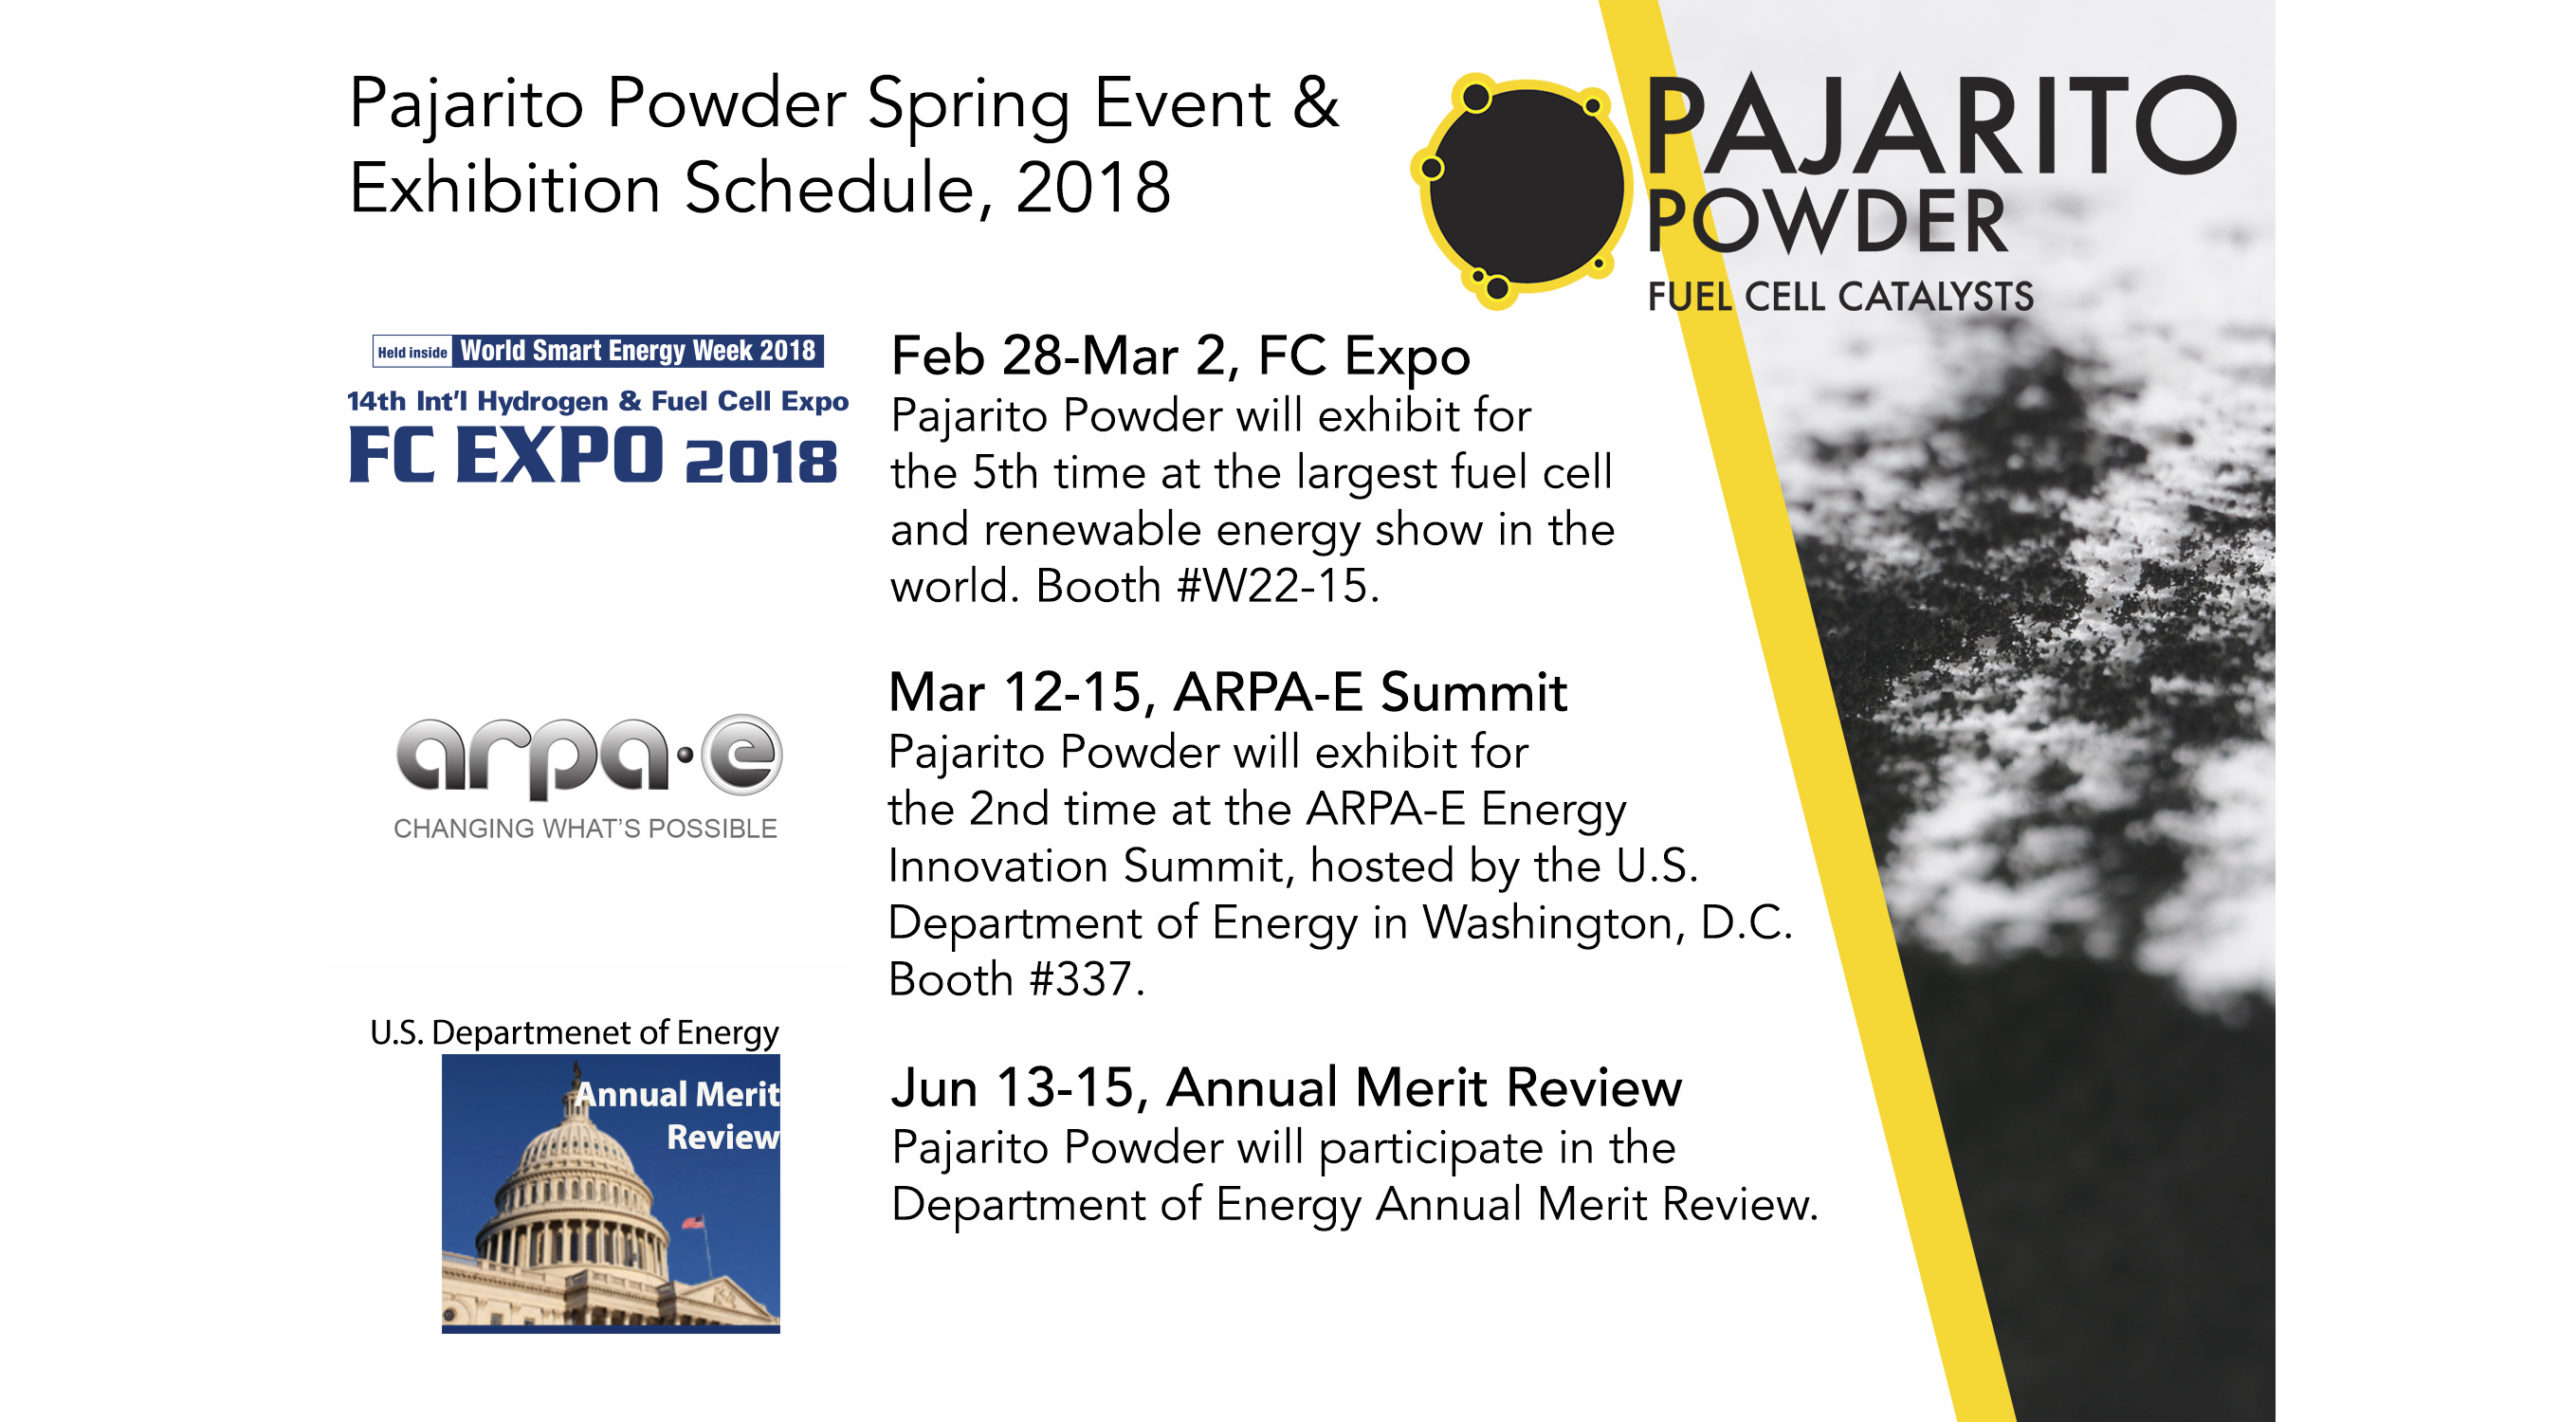 Pajarito Powder attends FC Expo, ARPA-E and AMR